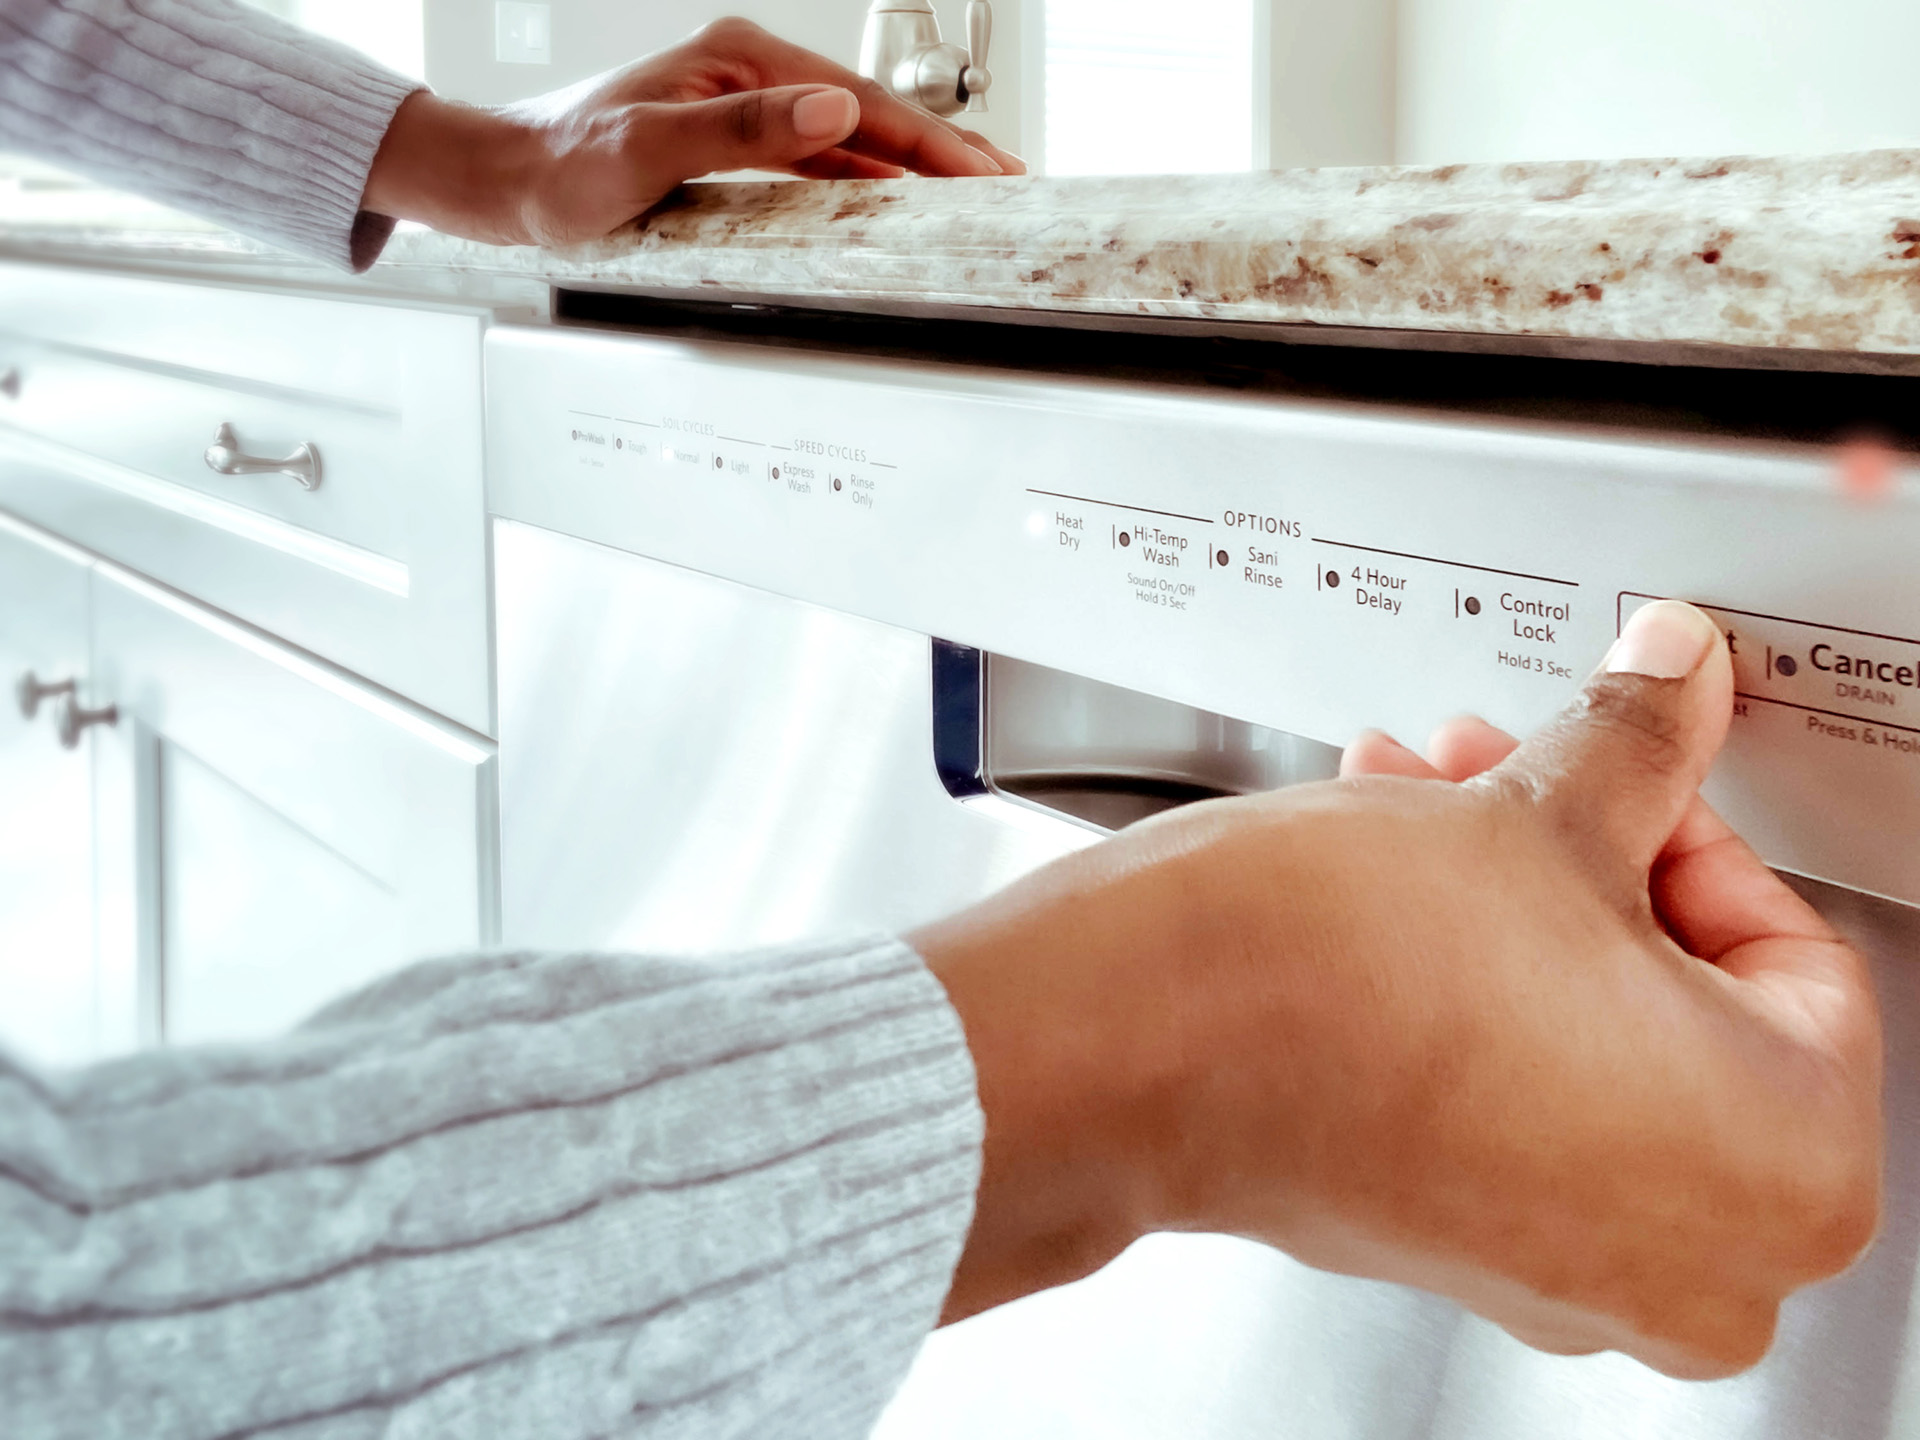 The Right Way to Air Dry Dishes for Energy Savings - Major Energy